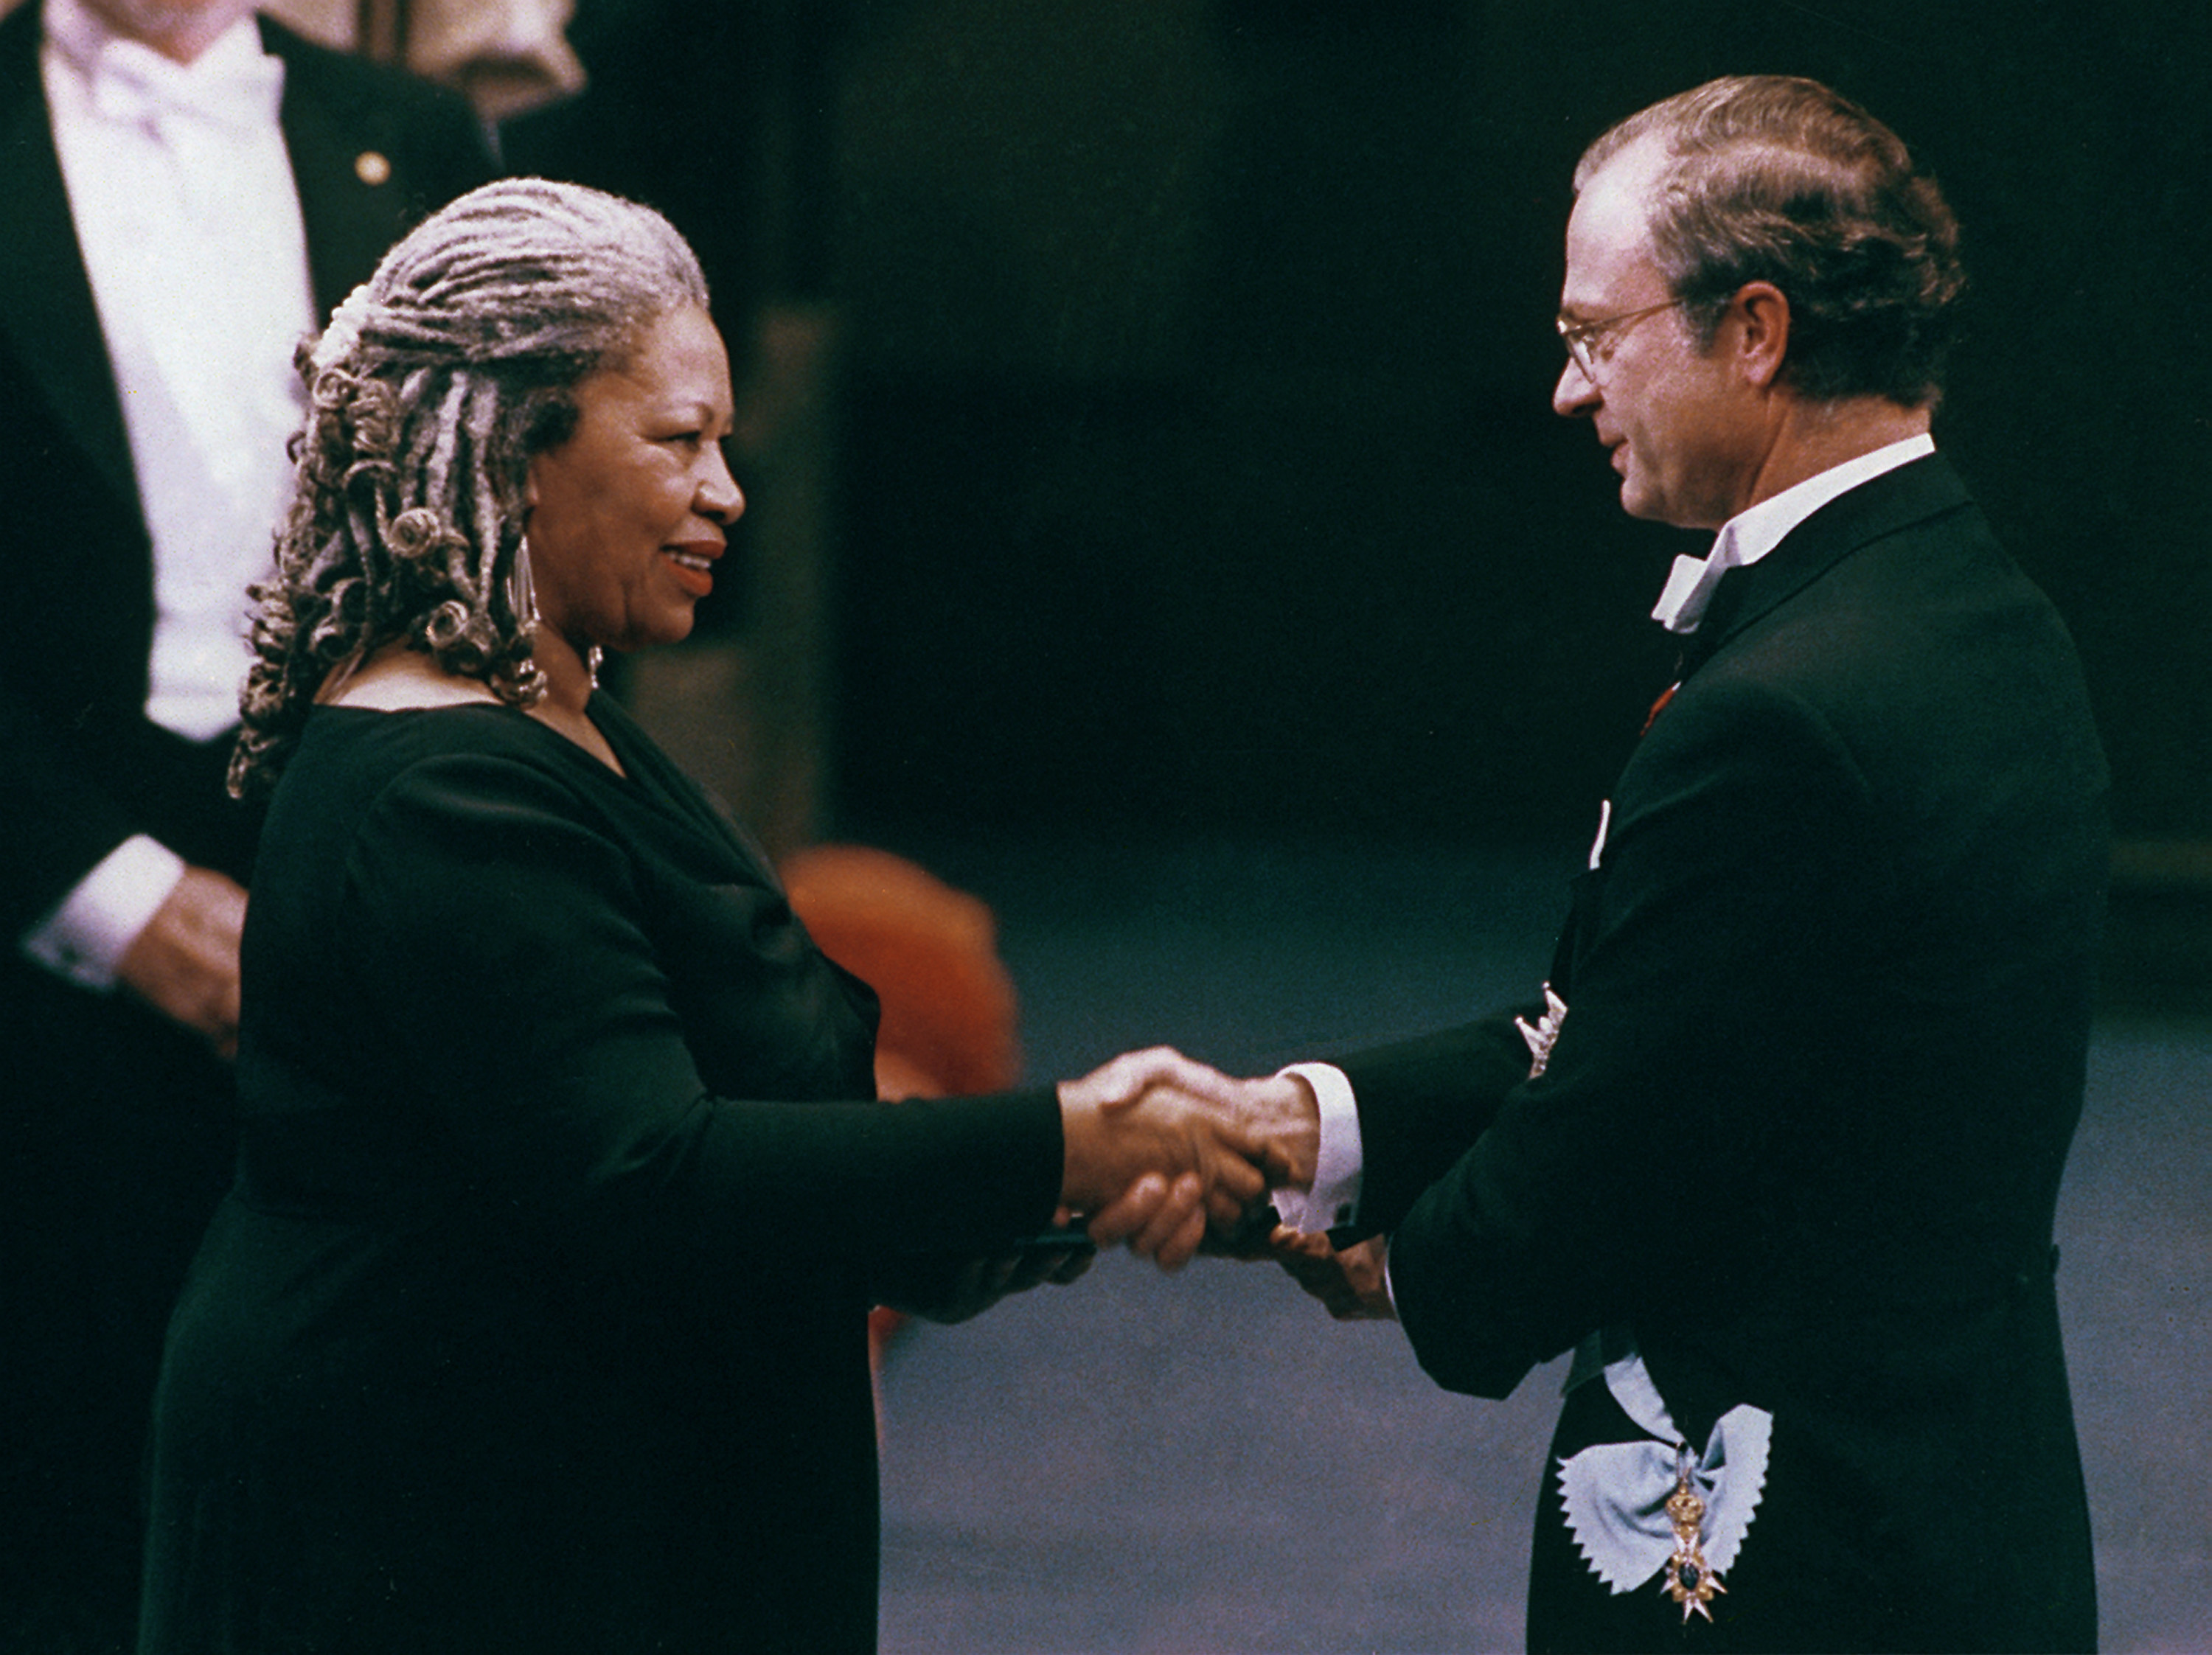 American writer Toni Morrison receives the Nobel Prize in literature from King Carl XVI Gustaf of Sweden, right, in the Concert Hall in Stockholm, Sweden, Friday, Dec. 10, 1993. Morrison, who was born in Lorain, Ohio in 1931 and teaches at Princeton University, N.J., is the first black woman to receive this prize. (AP Photo)